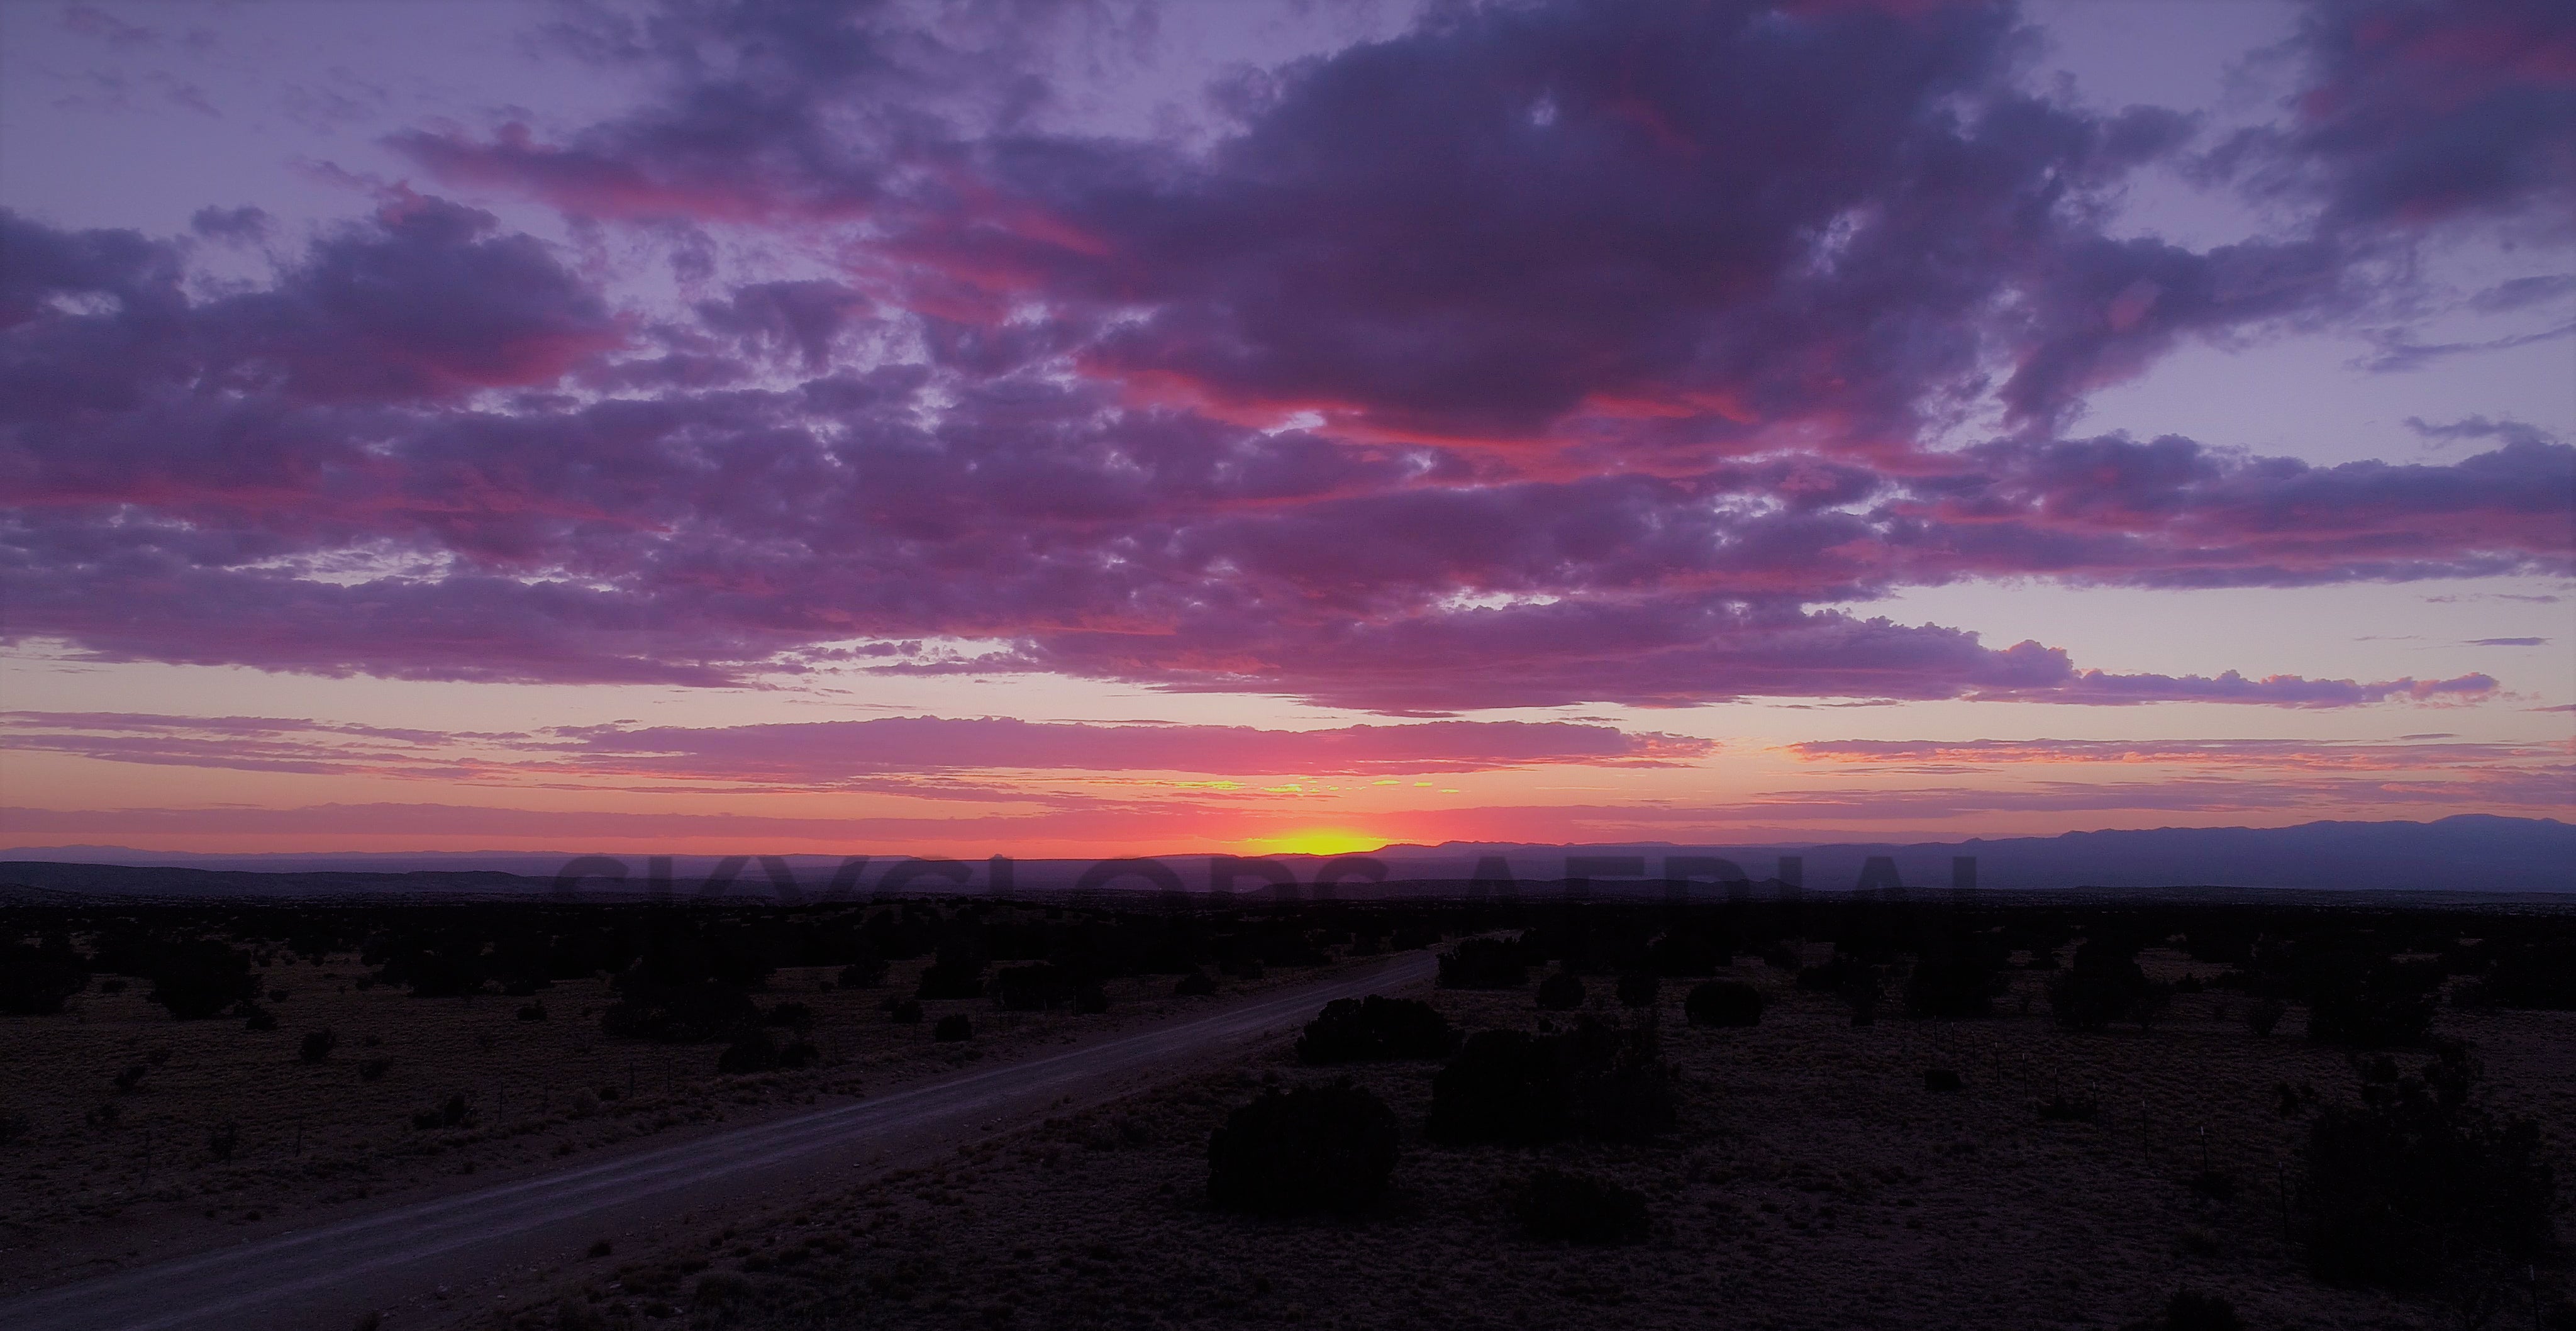 A colorful desert sunset in New Mexico